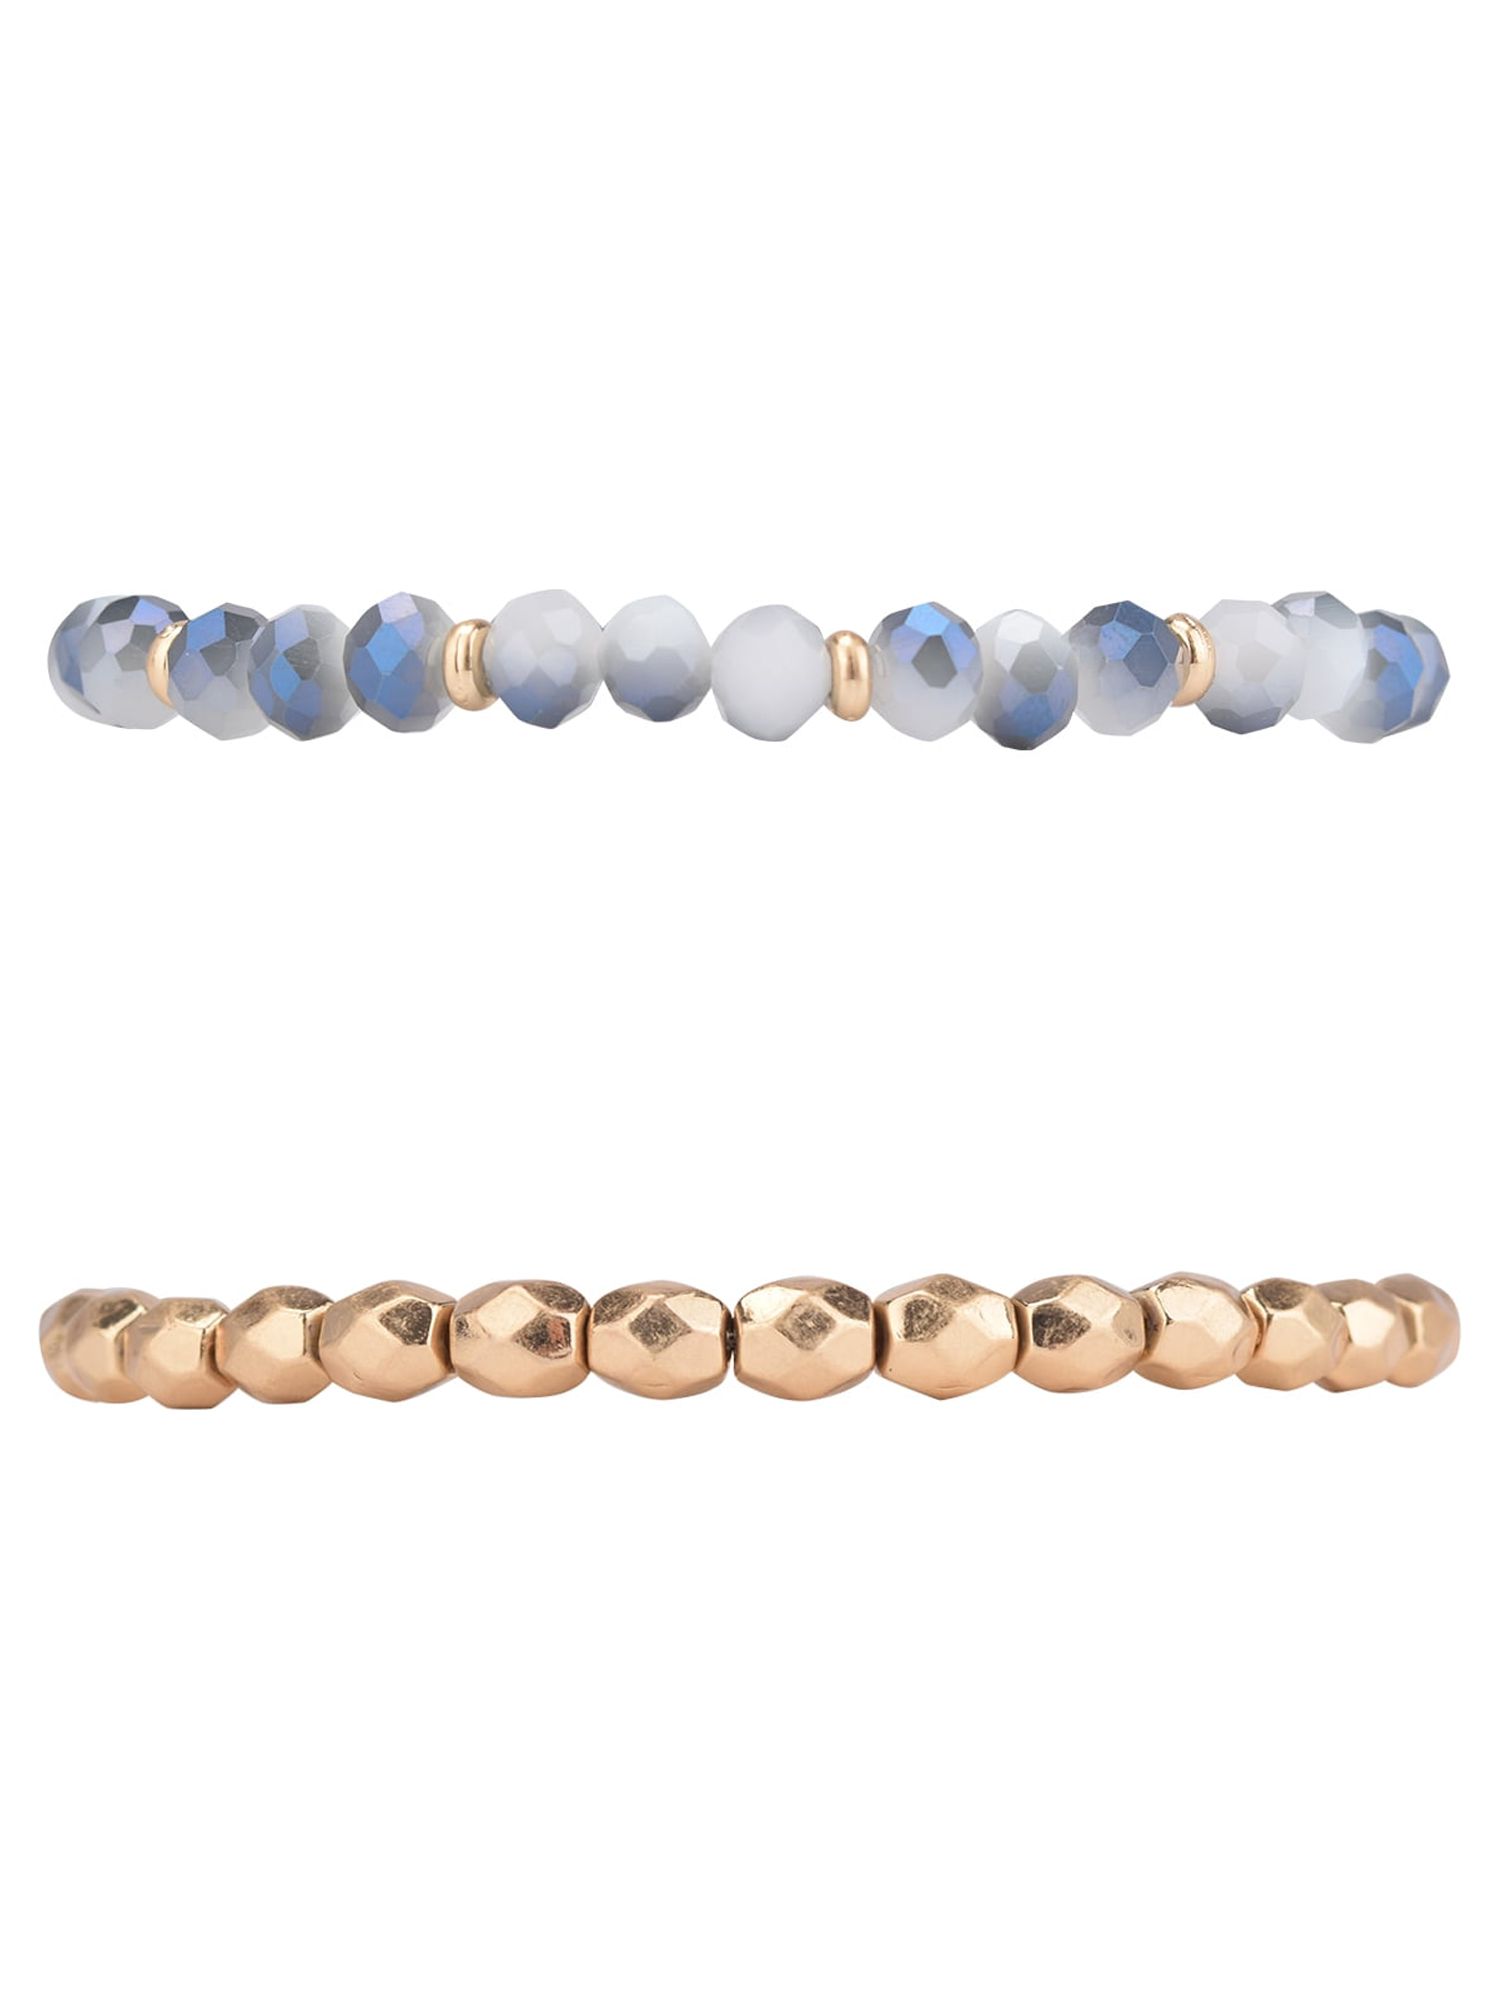 The Pioneer Woman Hammered Gold and Blue Tone Beaded Bangle Bracelet Set, 5 Pack - image 3 of 5